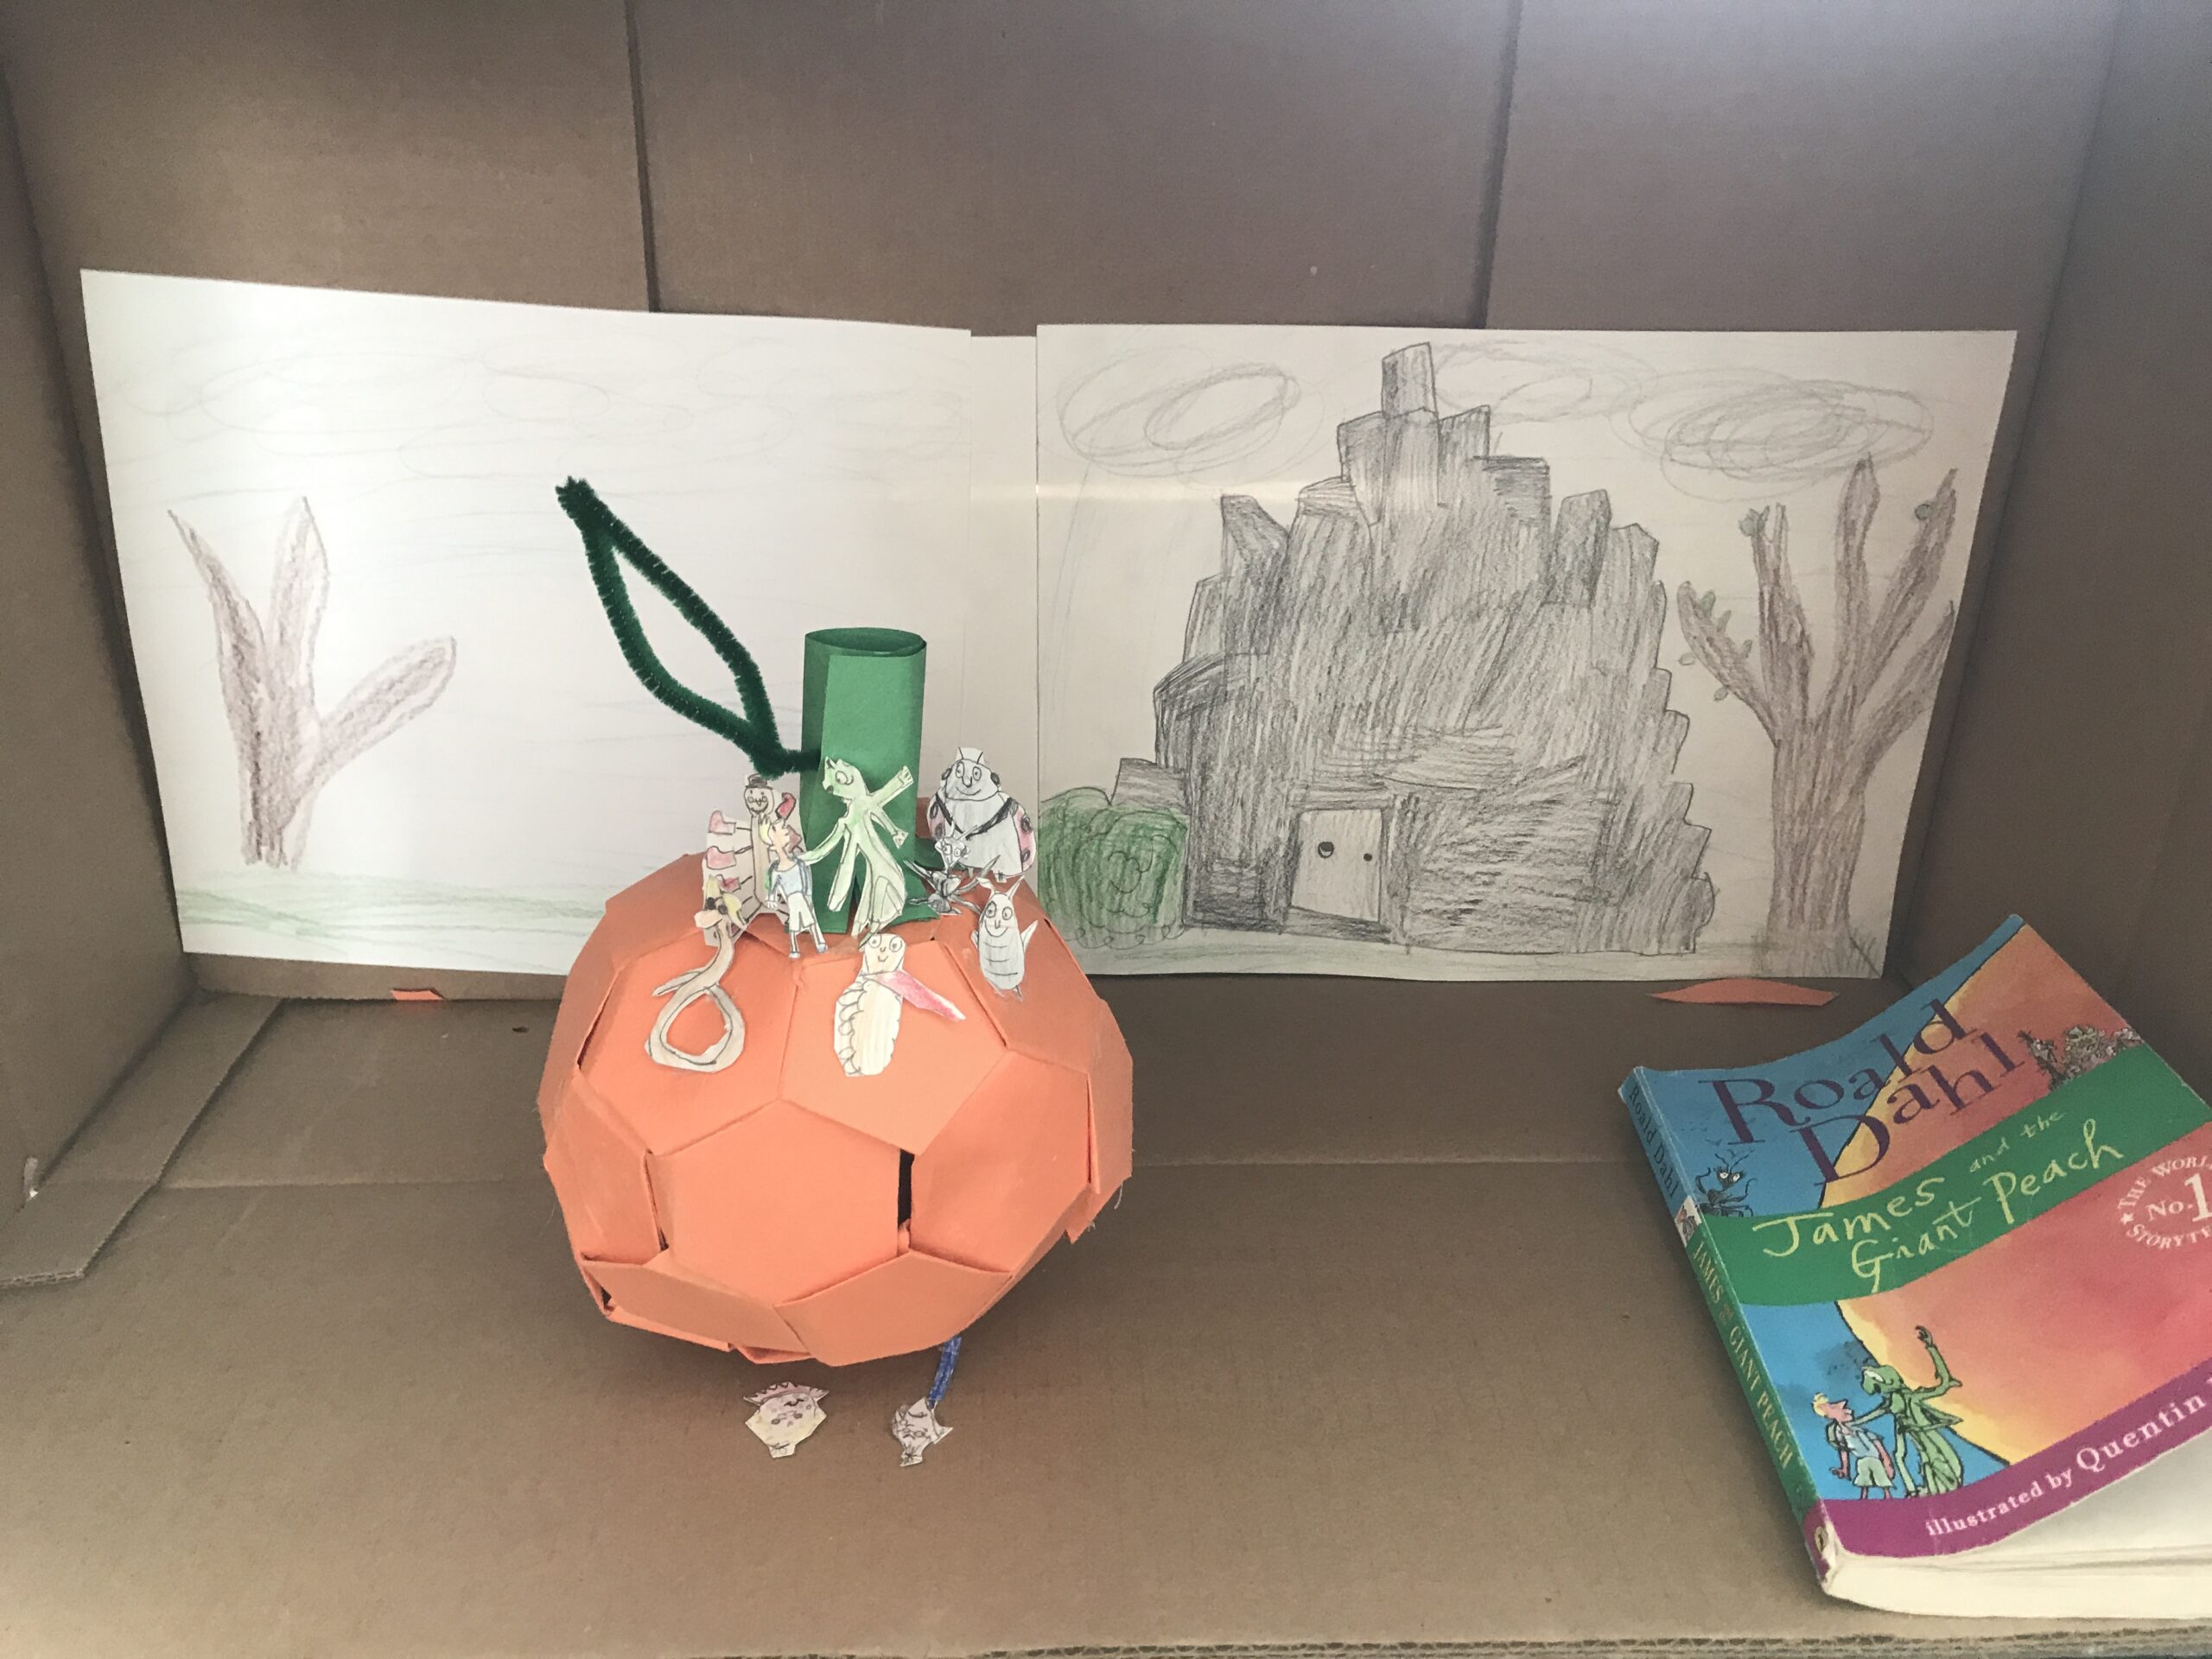 Katie's book report on "James and the Giant Peach"